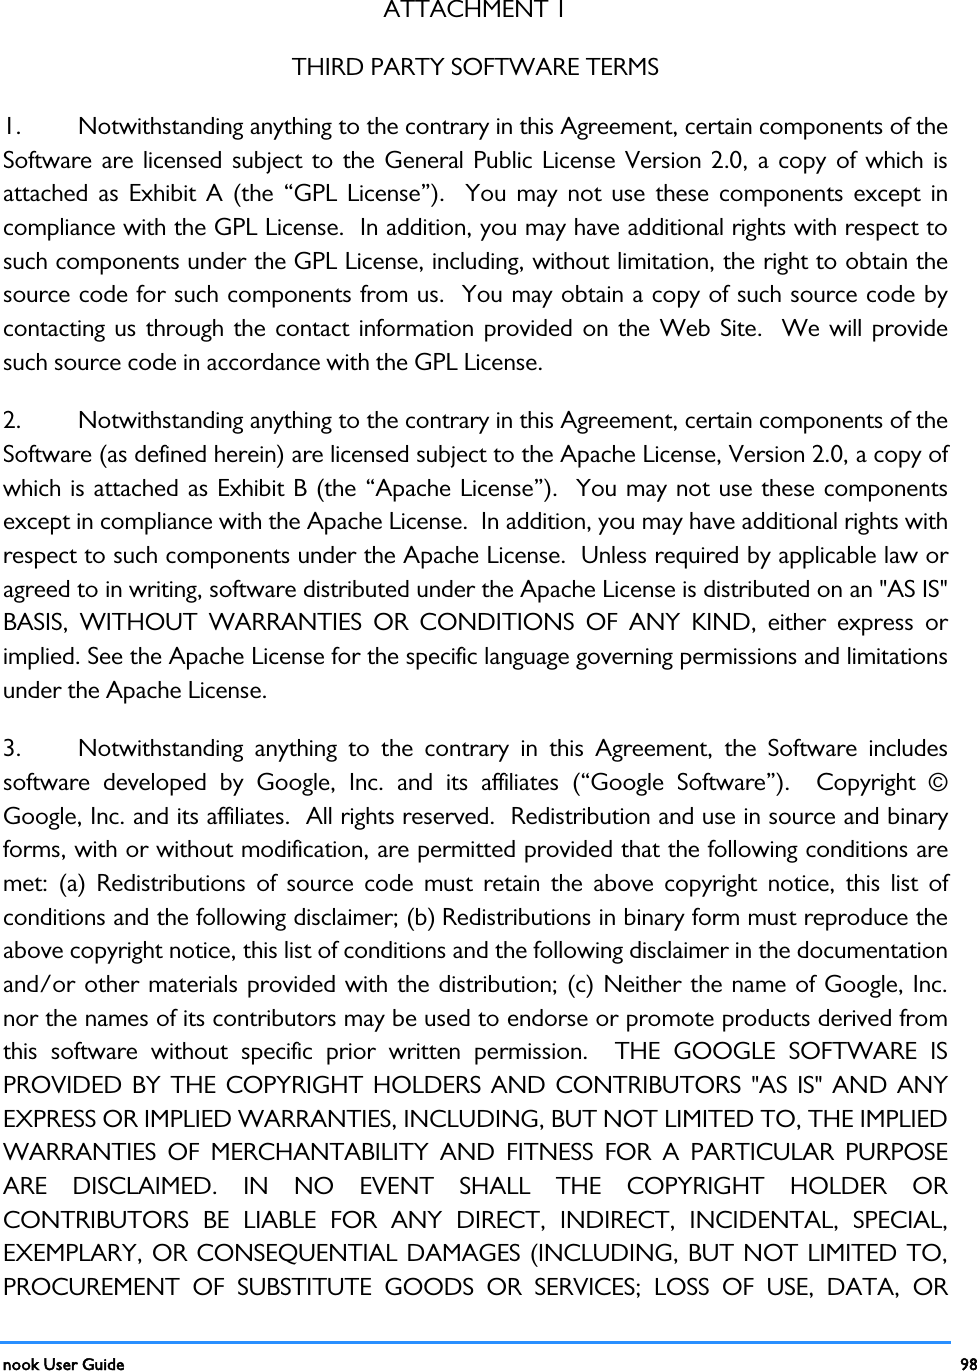  nook User Guide    98        ATTACHMENT 1 THIRD PARTY SOFTWARE TERMS 1.  Notwithstanding anything to the contrary in this Agreement, certain components of the Software are licensed subject to the General Public License Version 2.0, a copy of which is attached as Exhibit A (the “GPL License”).  You may not use these components except in compliance with the GPL License.  In addition, you may have additional rights with respect to such components under the GPL License, including, without limitation, the right to obtain the source code for such components from us.  You may obtain a copy of such source code by contacting us through the contact information provided on the Web Site.  We will provide such source code in accordance with the GPL License.   2.  Notwithstanding anything to the contrary in this Agreement, certain components of the Software (as defined herein) are licensed subject to the Apache License, Version 2.0, a copy of which is attached as Exhibit B (the “Apache License”).  You may not use these components except in compliance with the Apache License.  In addition, you may have additional rights with respect to such components under the Apache License.  Unless required by applicable law or agreed to in writing, software distributed under the Apache License is distributed on an &quot;AS IS&quot; BASIS, WITHOUT WARRANTIES OR CONDITIONS OF ANY KIND, either express or implied. See the Apache License for the specific language governing permissions and limitations under the Apache License. 3.  Notwithstanding anything to the contrary in this Agreement, the Software includes software developed by Google, Inc. and its affiliates (“Google Software”).  Copyright © Google, Inc. and its affiliates.  All rights reserved.  Redistribution and use in source and binary forms, with or without modification, are permitted provided that the following conditions are met: (a) Redistributions of source code must retain the above copyright notice, this list of conditions and the following disclaimer; (b) Redistributions in binary form must reproduce the above copyright notice, this list of conditions and the following disclaimer in the documentation and/or other materials provided with the distribution; (c) Neither the name of Google, Inc. nor the names of its contributors may be used to endorse or promote products derived from this software without specific prior written permission.  THE GOOGLE SOFTWARE IS PROVIDED BY THE COPYRIGHT HOLDERS AND CONTRIBUTORS &quot;AS IS&quot; AND ANY EXPRESS OR IMPLIED WARRANTIES, INCLUDING, BUT NOT LIMITED TO, THE IMPLIED WARRANTIES OF MERCHANTABILITY AND FITNESS FOR A PARTICULAR PURPOSE ARE DISCLAIMED. IN NO EVENT SHALL THE COPYRIGHT HOLDER OR CONTRIBUTORS BE LIABLE FOR ANY DIRECT, INDIRECT, INCIDENTAL, SPECIAL, EXEMPLARY, OR CONSEQUENTIAL DAMAGES (INCLUDING, BUT NOT LIMITED TO, PROCUREMENT OF SUBSTITUTE GOODS OR SERVICES; LOSS OF USE, DATA, OR 